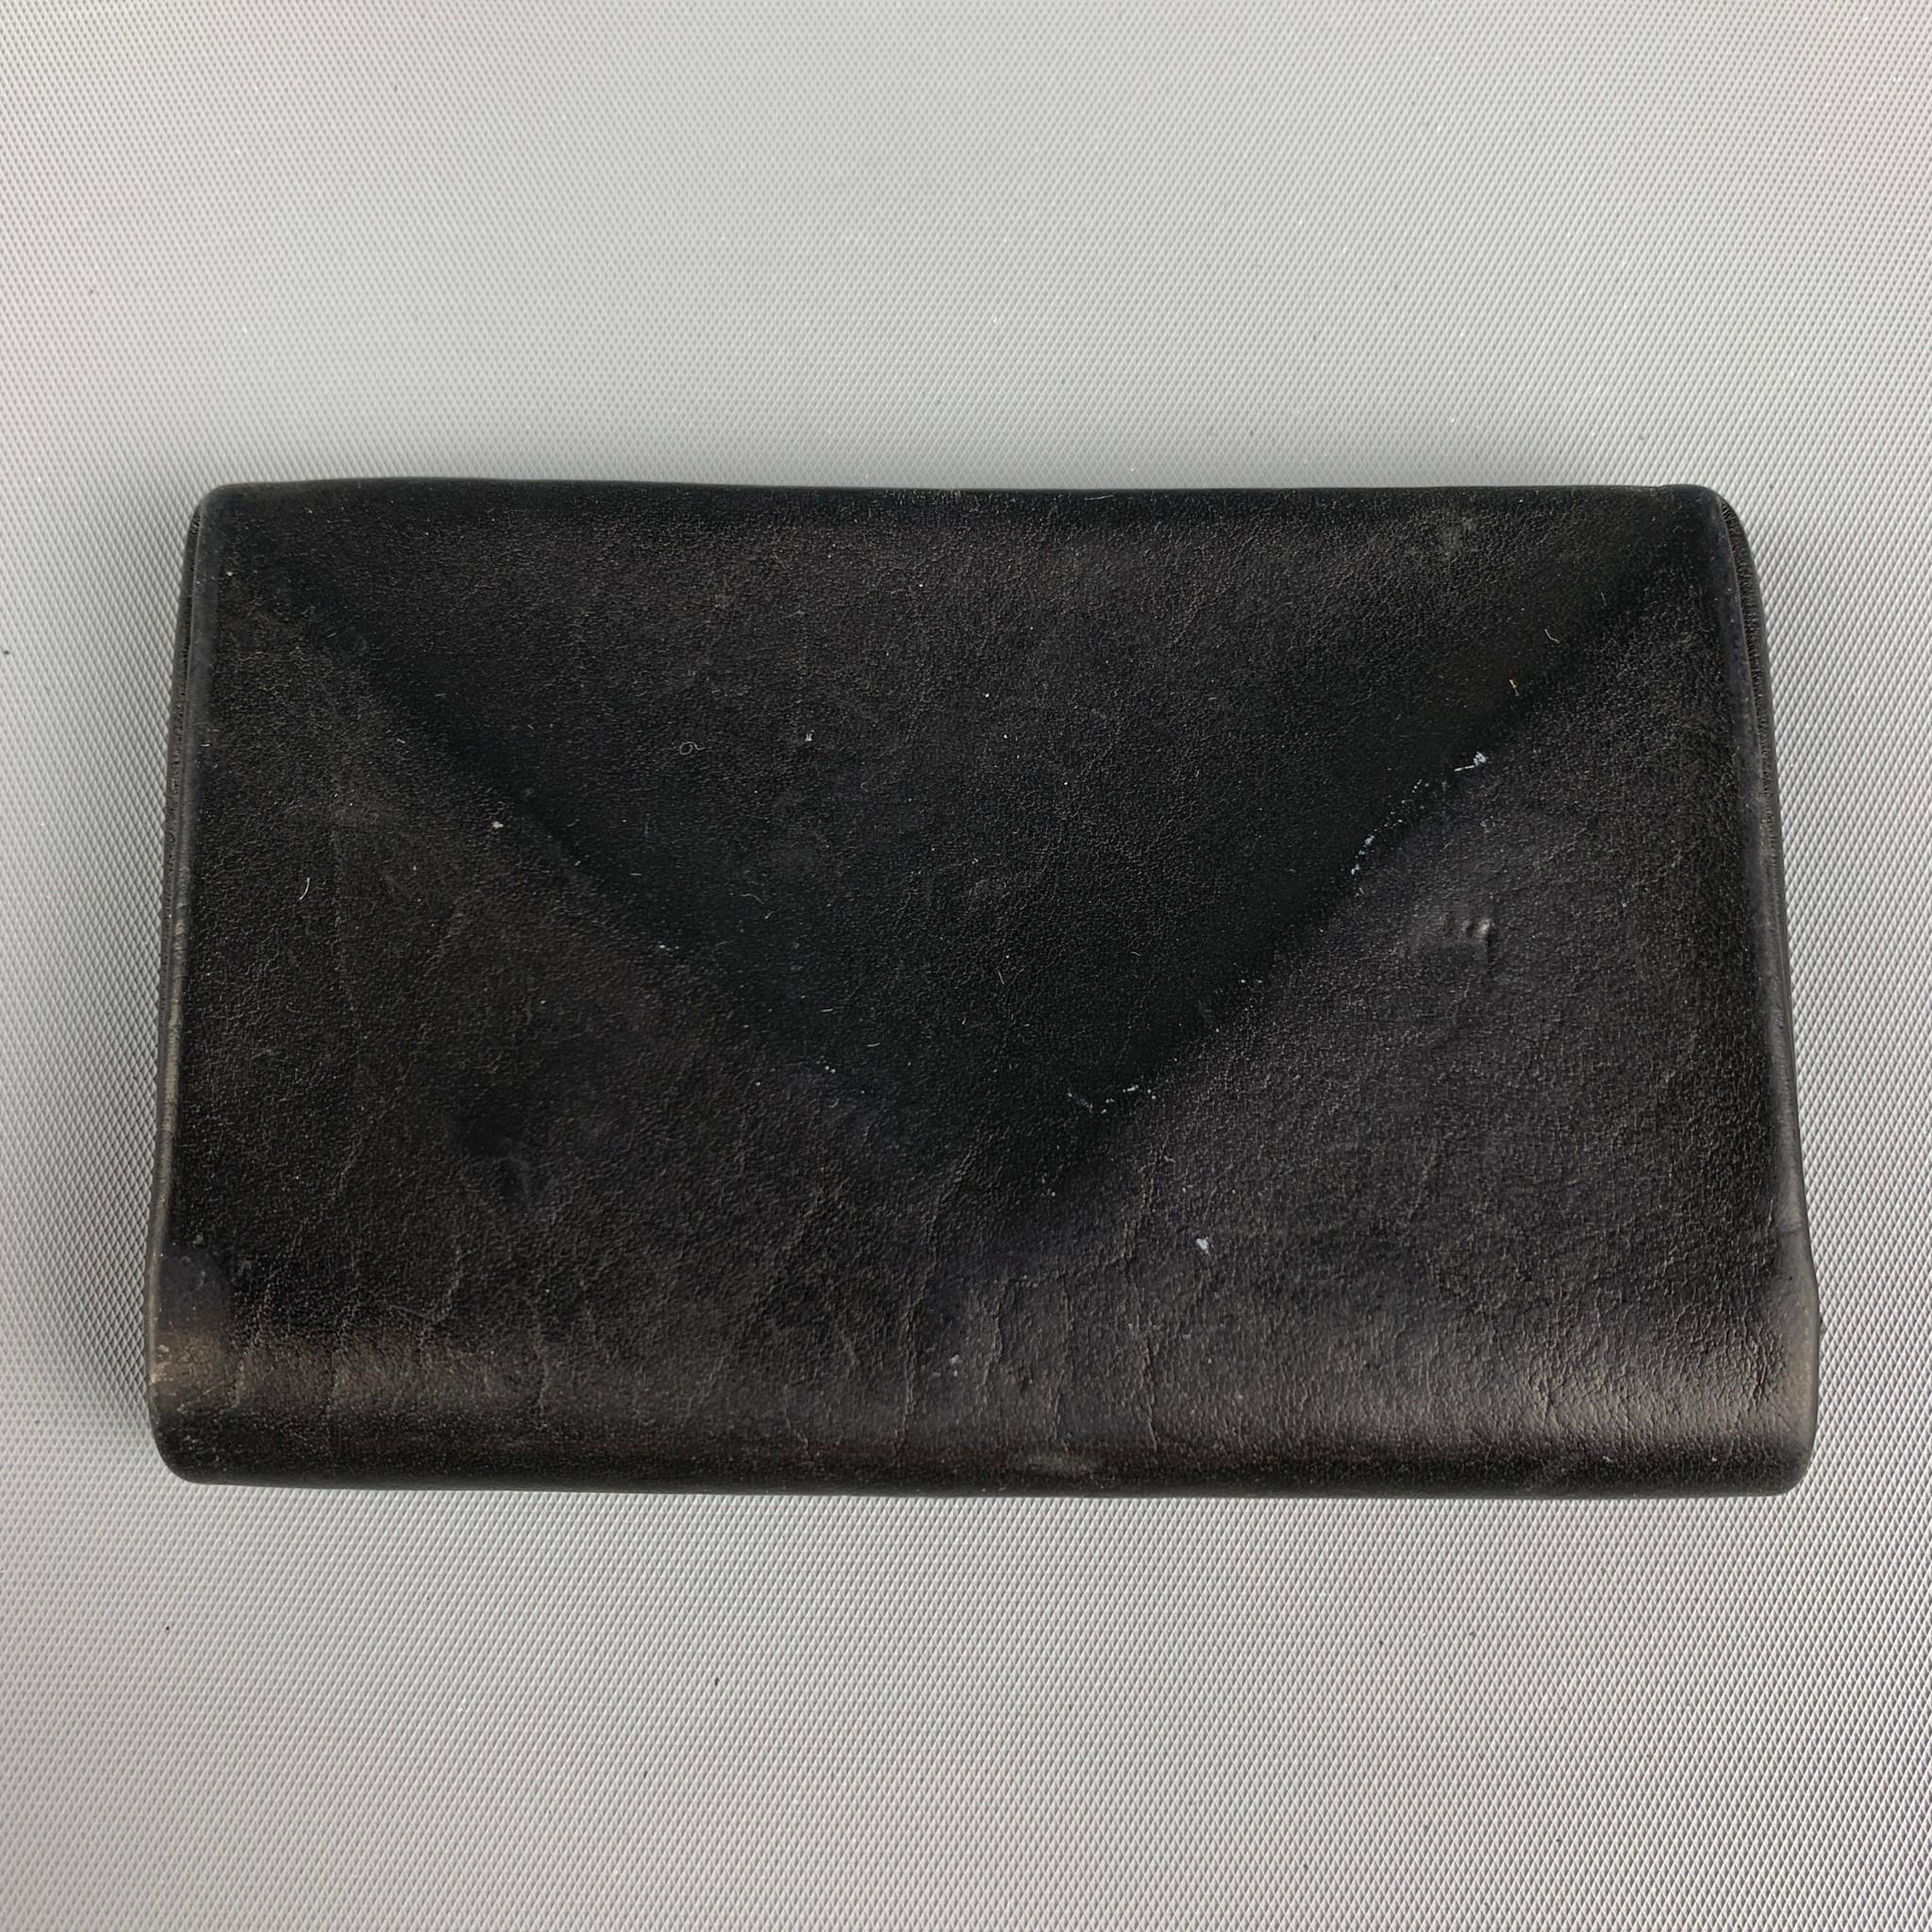 M.A+ wallet comes in a black leather featuring a origami style and signature sterling silver logo. 

Very Good Pre-Owned Condition.

Measurements:

Length: 3.5 in.
Height: 2.5 in.